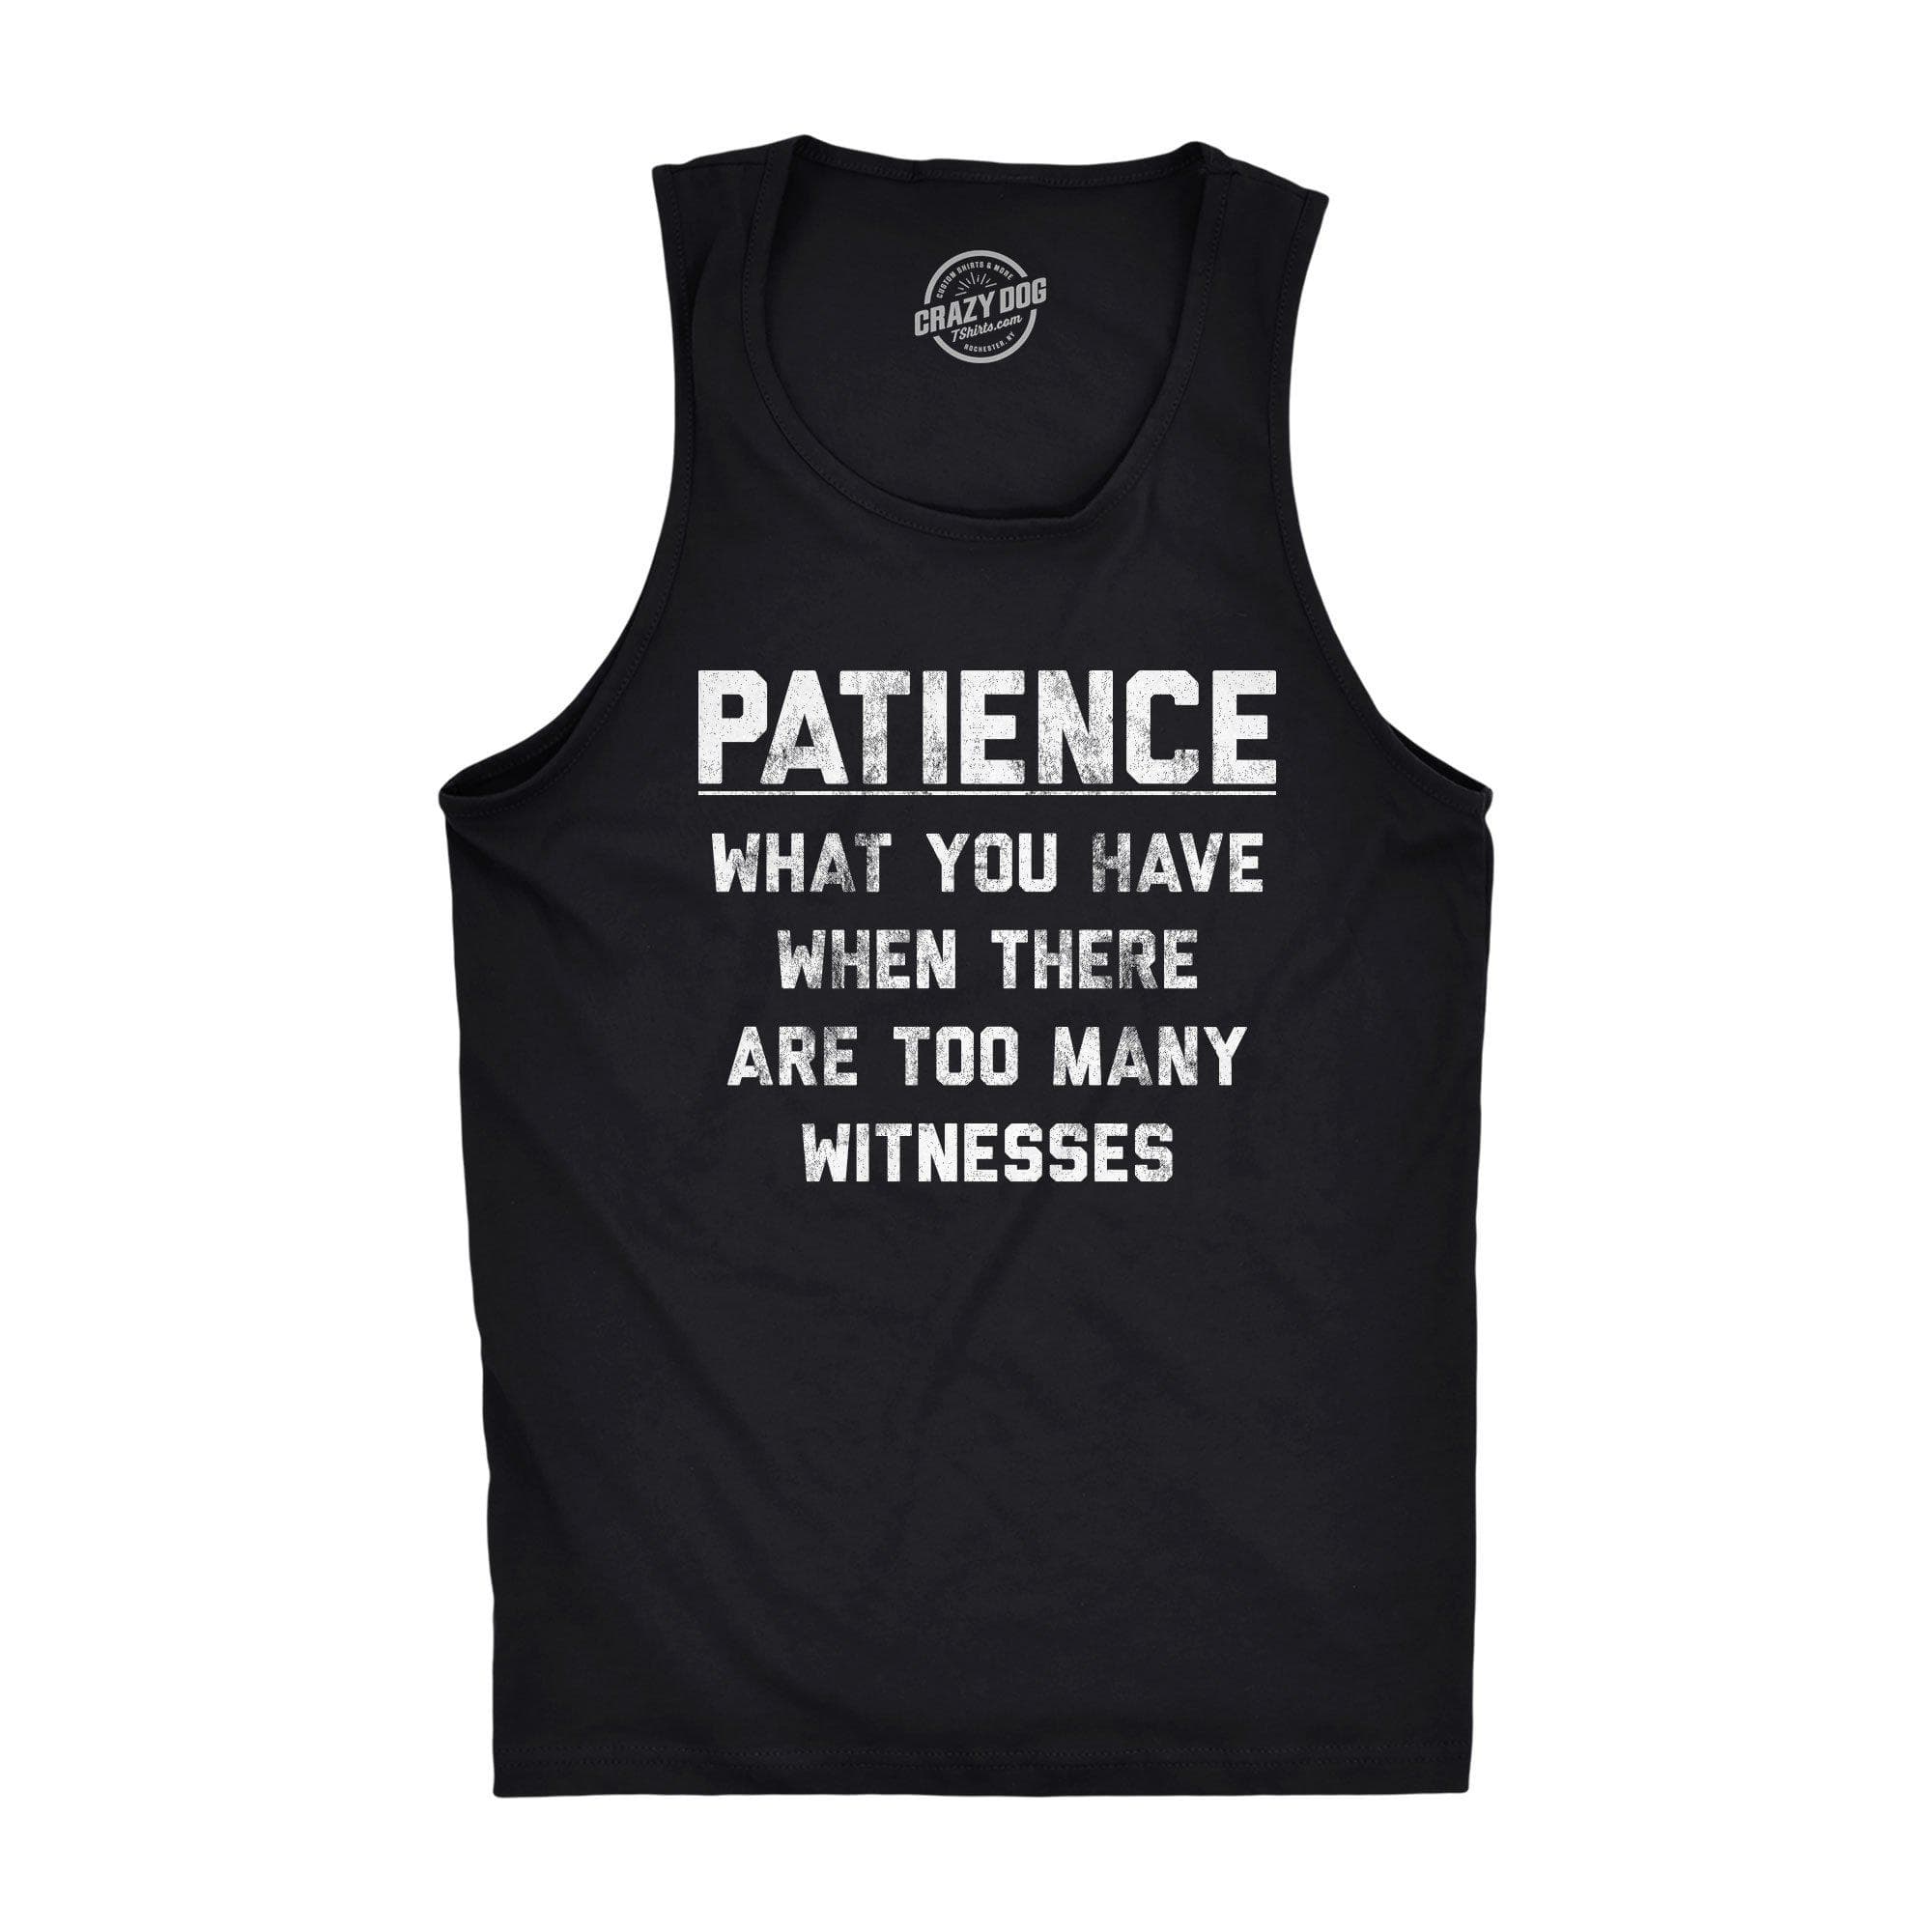 Patience What You Have When There Are Too Many Witnesses Men's Tank Top - Crazy Dog T-Shirts